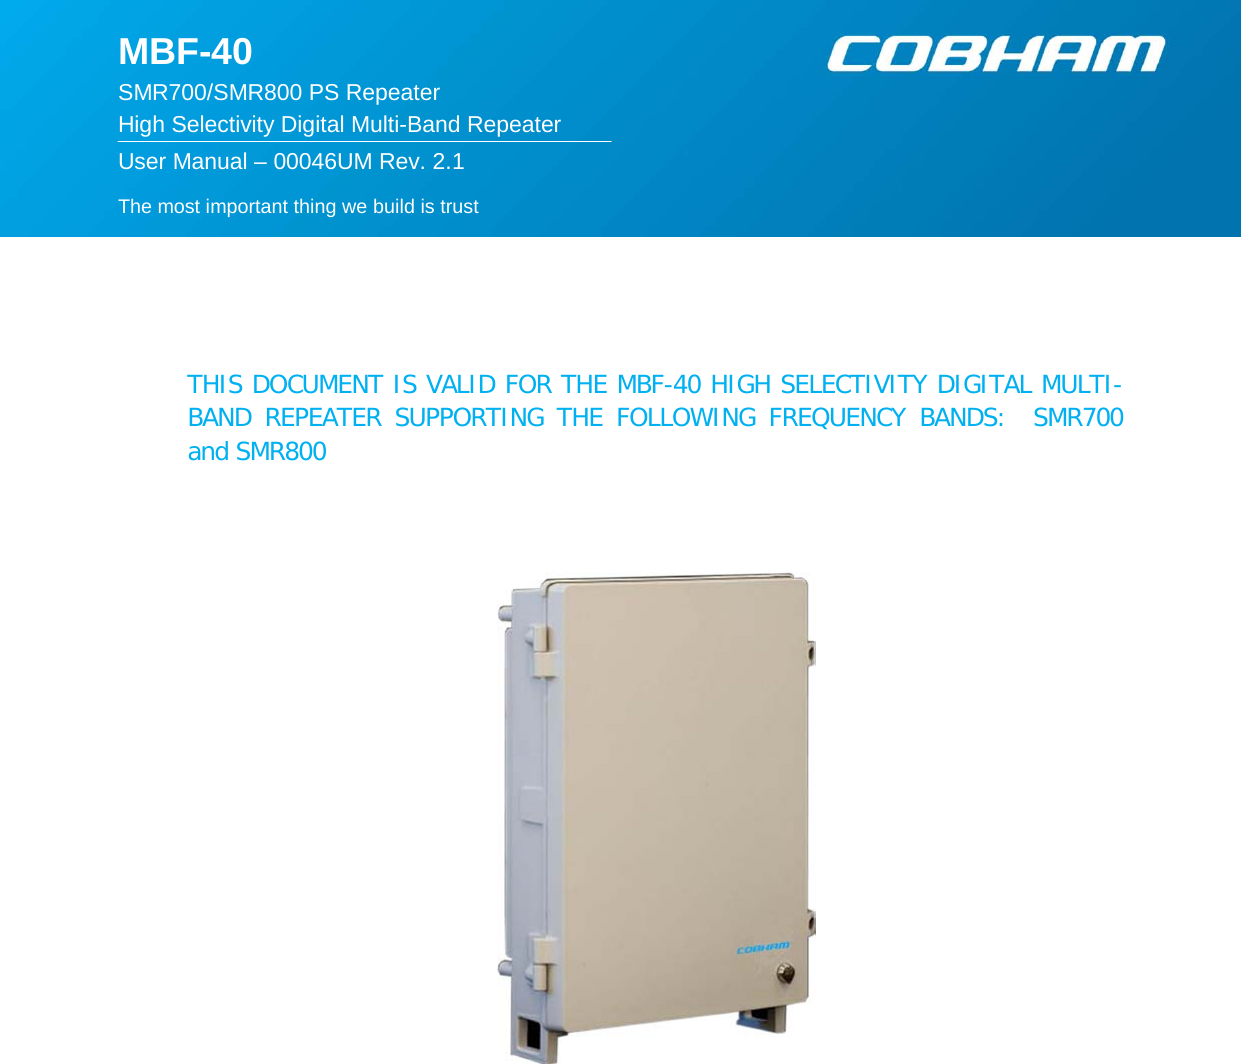   The most important thing we build is trust  MBF-40  SMR700/SMR800 PS Repeater High Selectivity Digital Multi-Band Repeater  User Manual – 00046UM Rev. 2.1      THIS DOCUMENT IS VALID FOR THE MBF-40 HIGH SELECTIVITY DIGITAL MULTI-BAND REPEATER SUPPORTING THE FOLLOWING FREQUENCY BANDS:  SMR700 and SMR800      